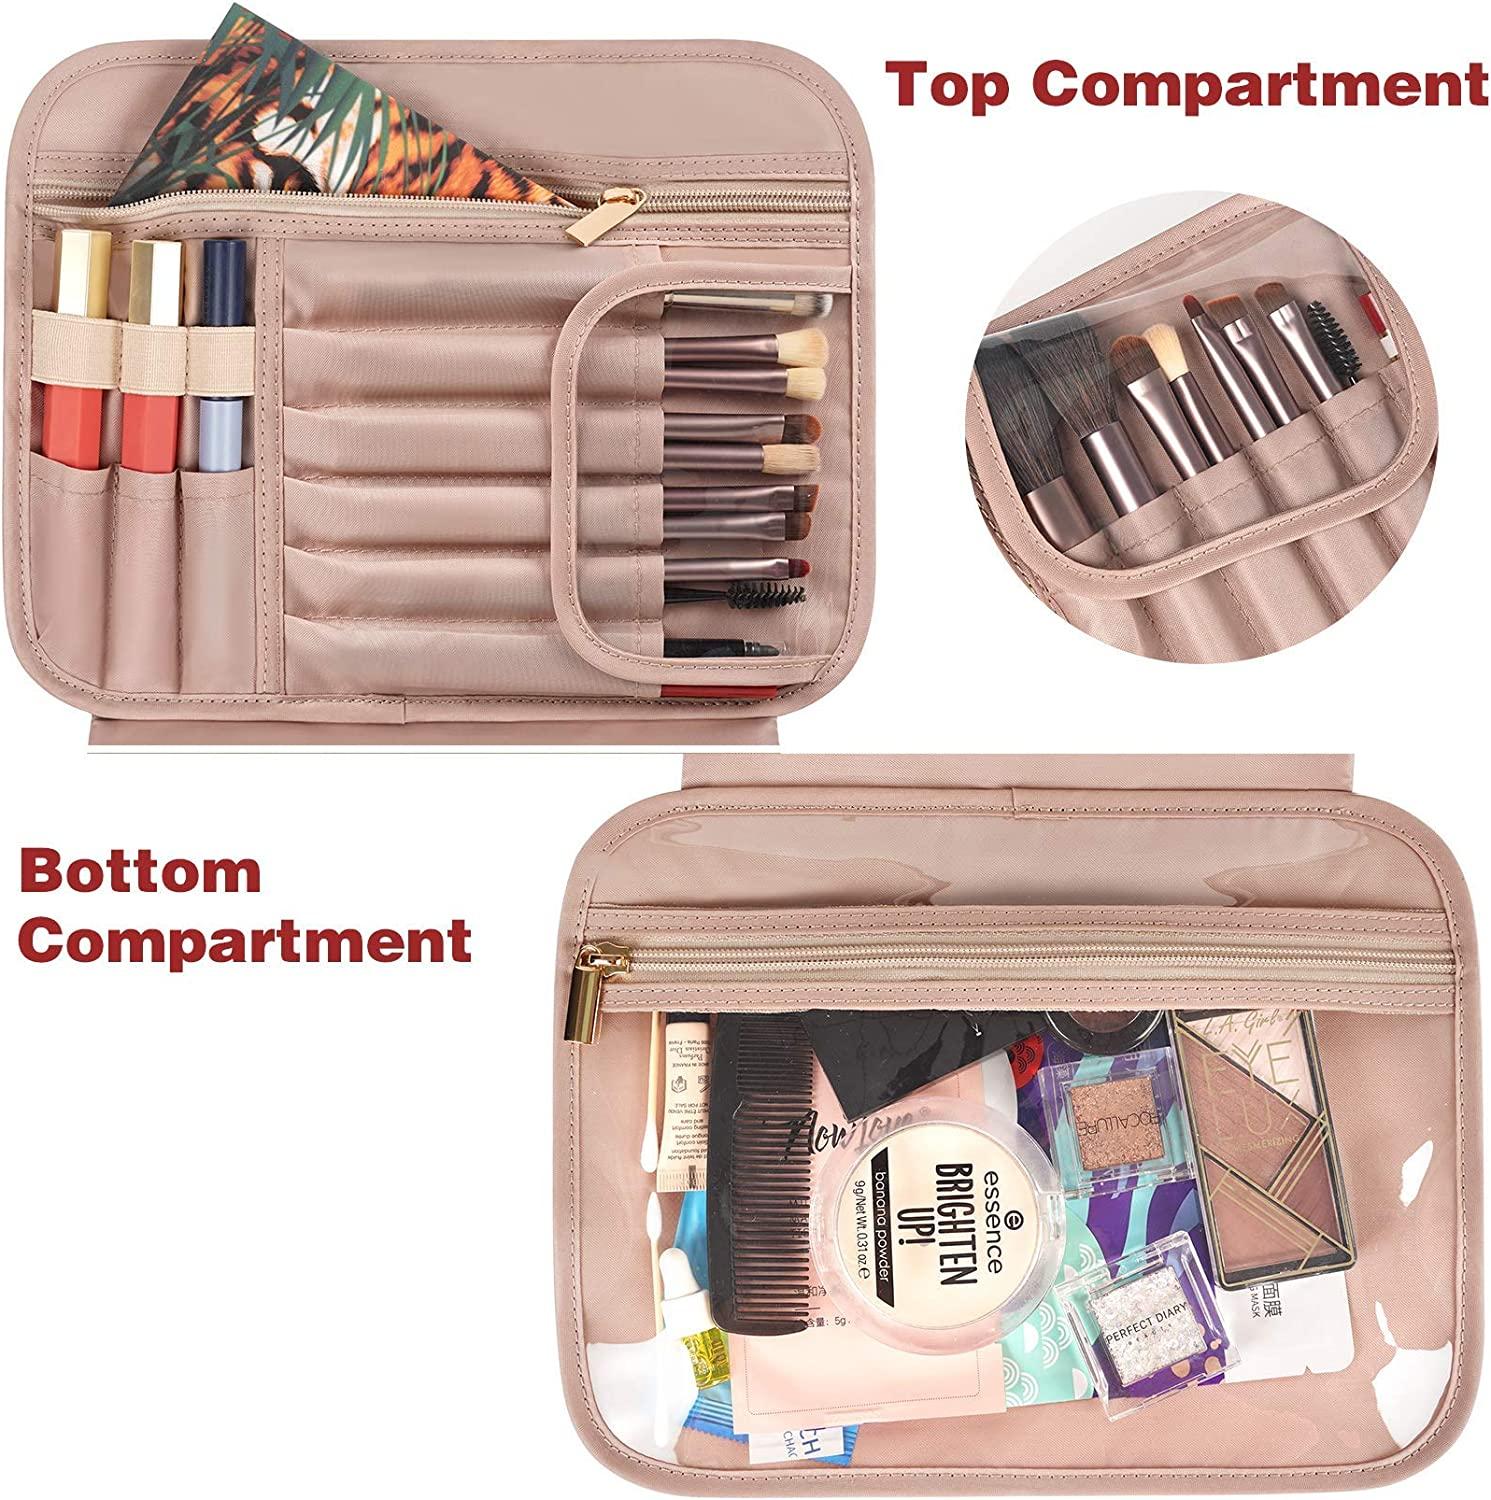 Toiletry Bag, Hanging Travel Makeup for Women, Large Waterproof Bags Travel Organizer Full Sized Container with Elastic Band Holders for Toiletries, Cosmetics, Brushes, Bottle, Pink Austere Pink